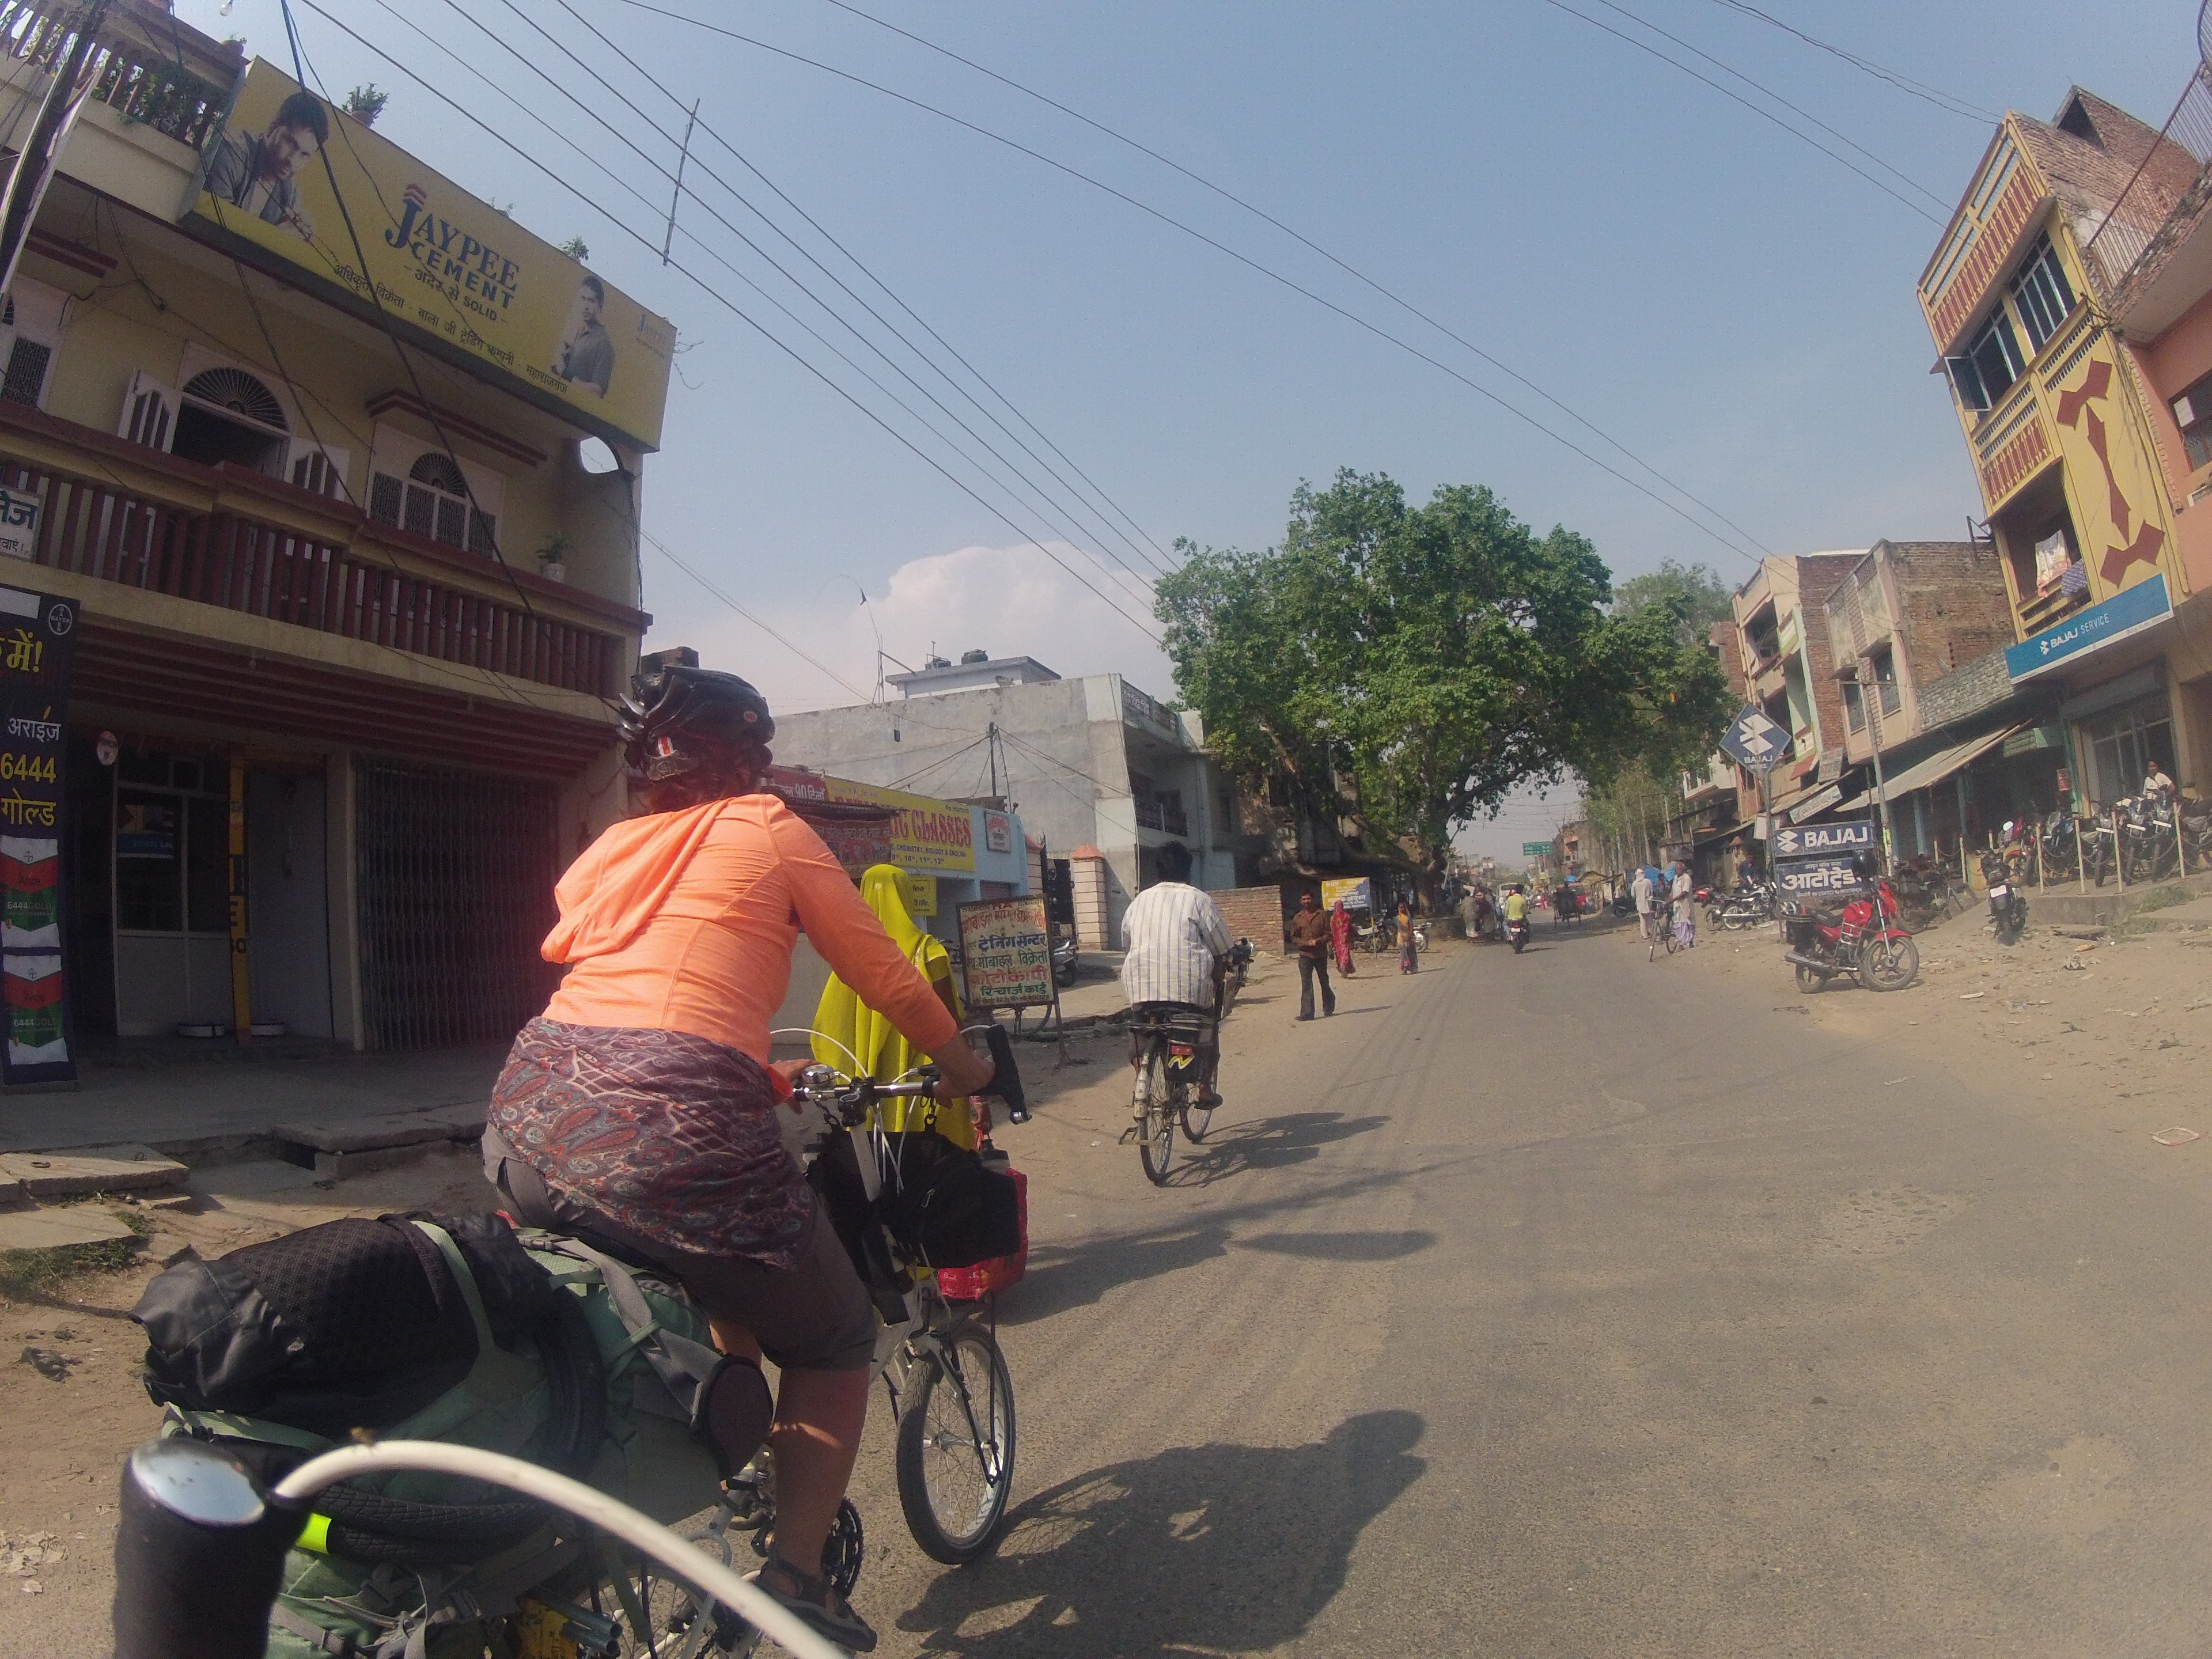 Pedaling to the Nepal border (and a kind meeting)